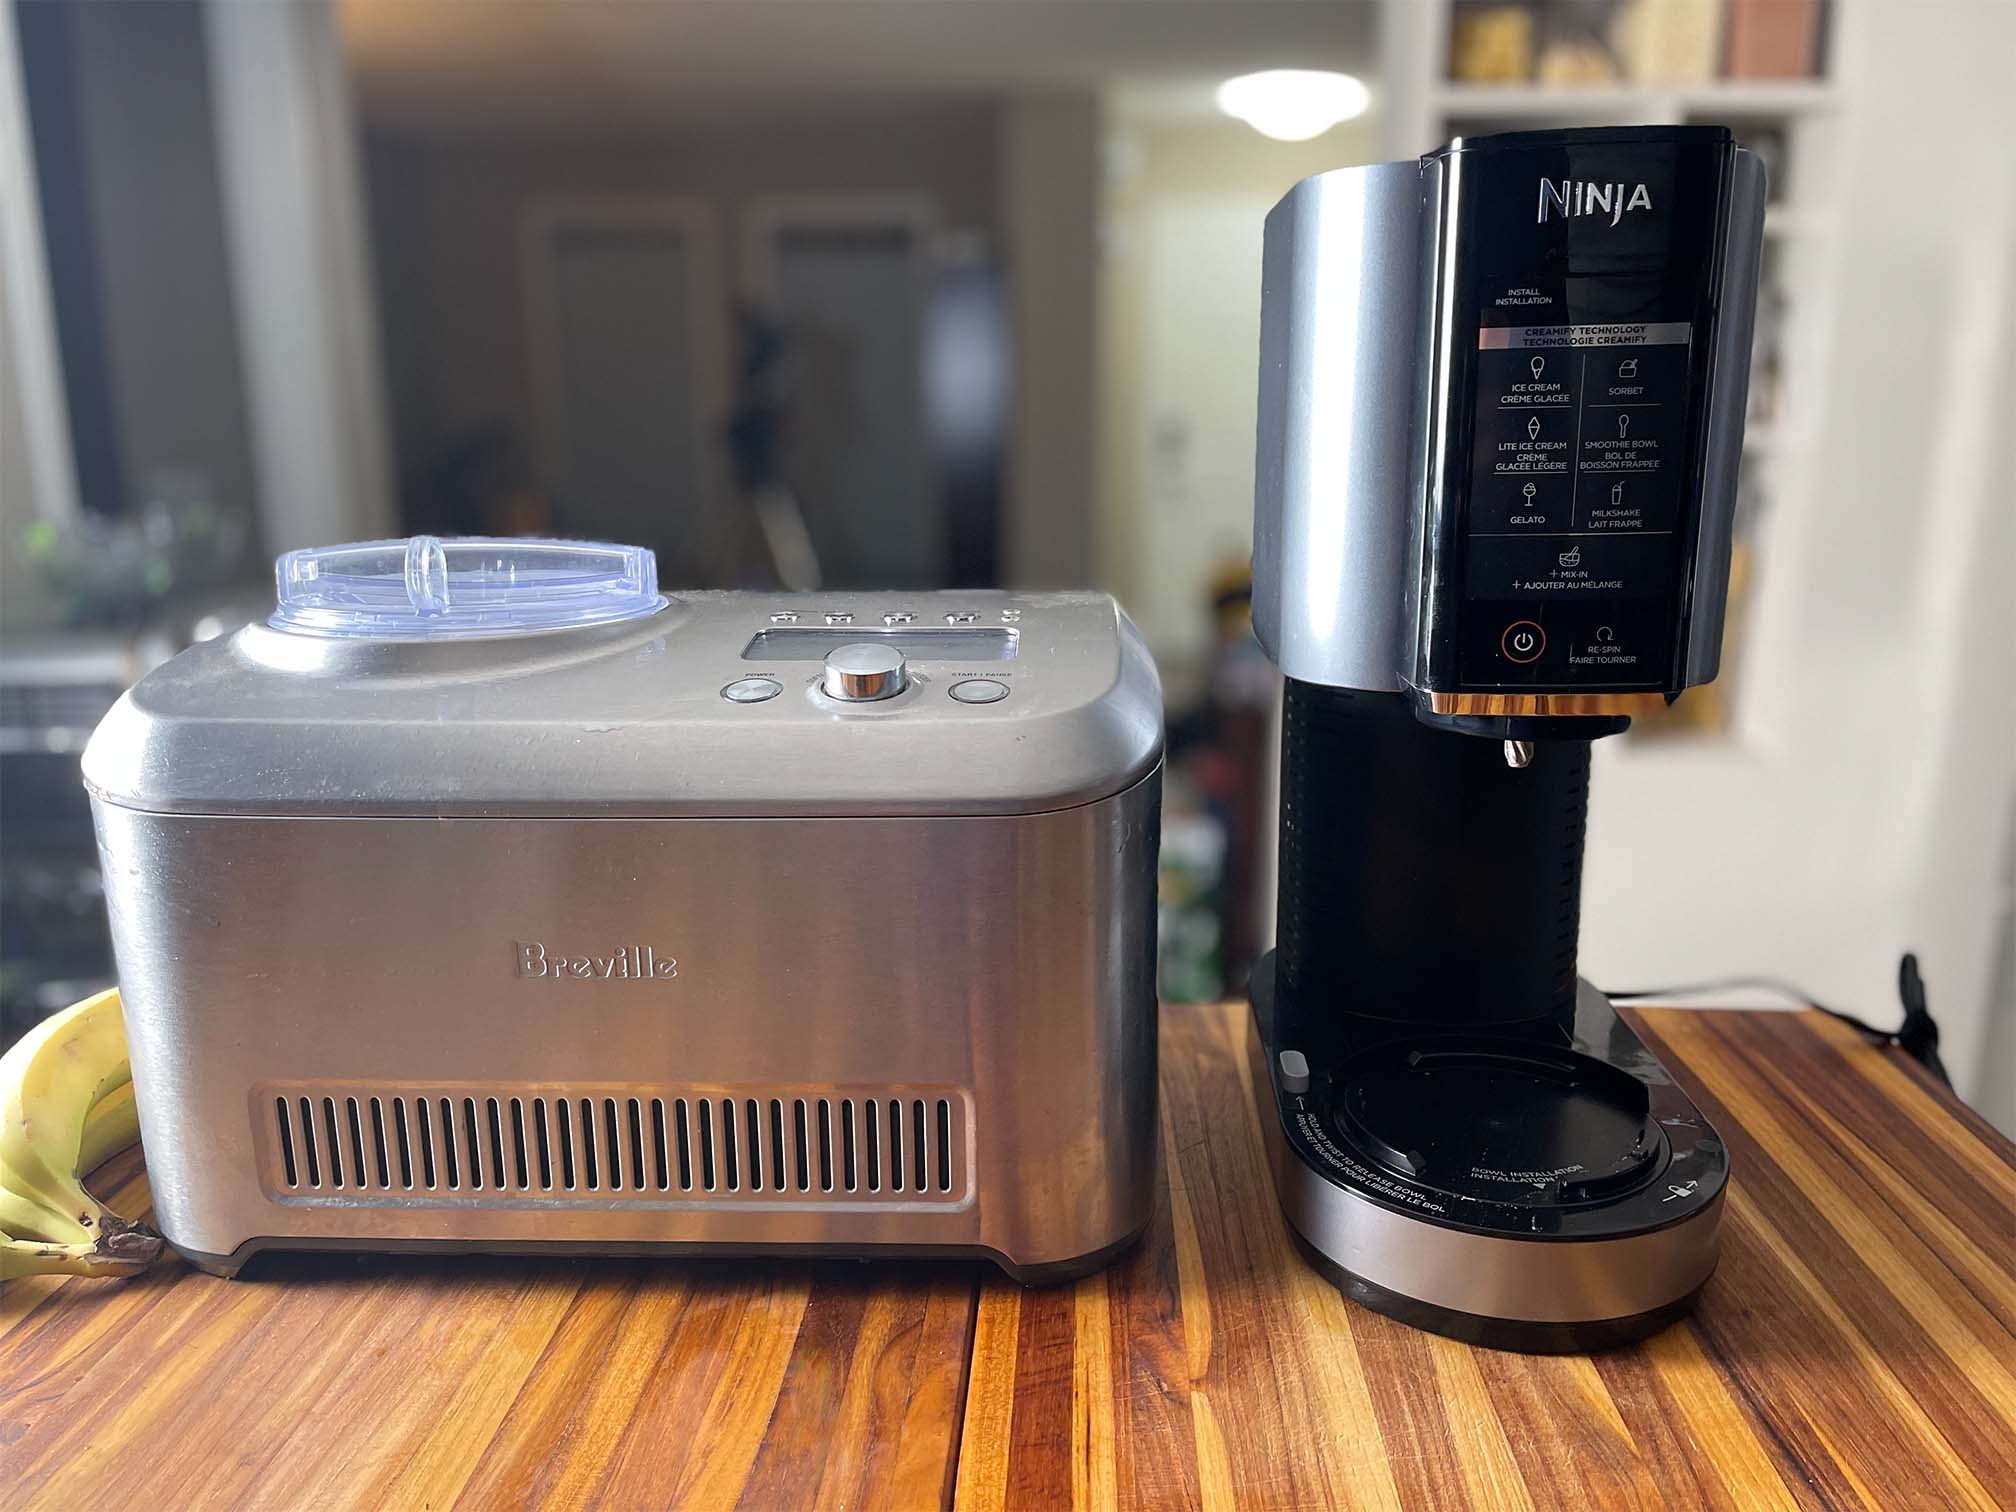 Ninja Creami Deluxe Review: Make Dreamy Frozen Treats at Home - CNET